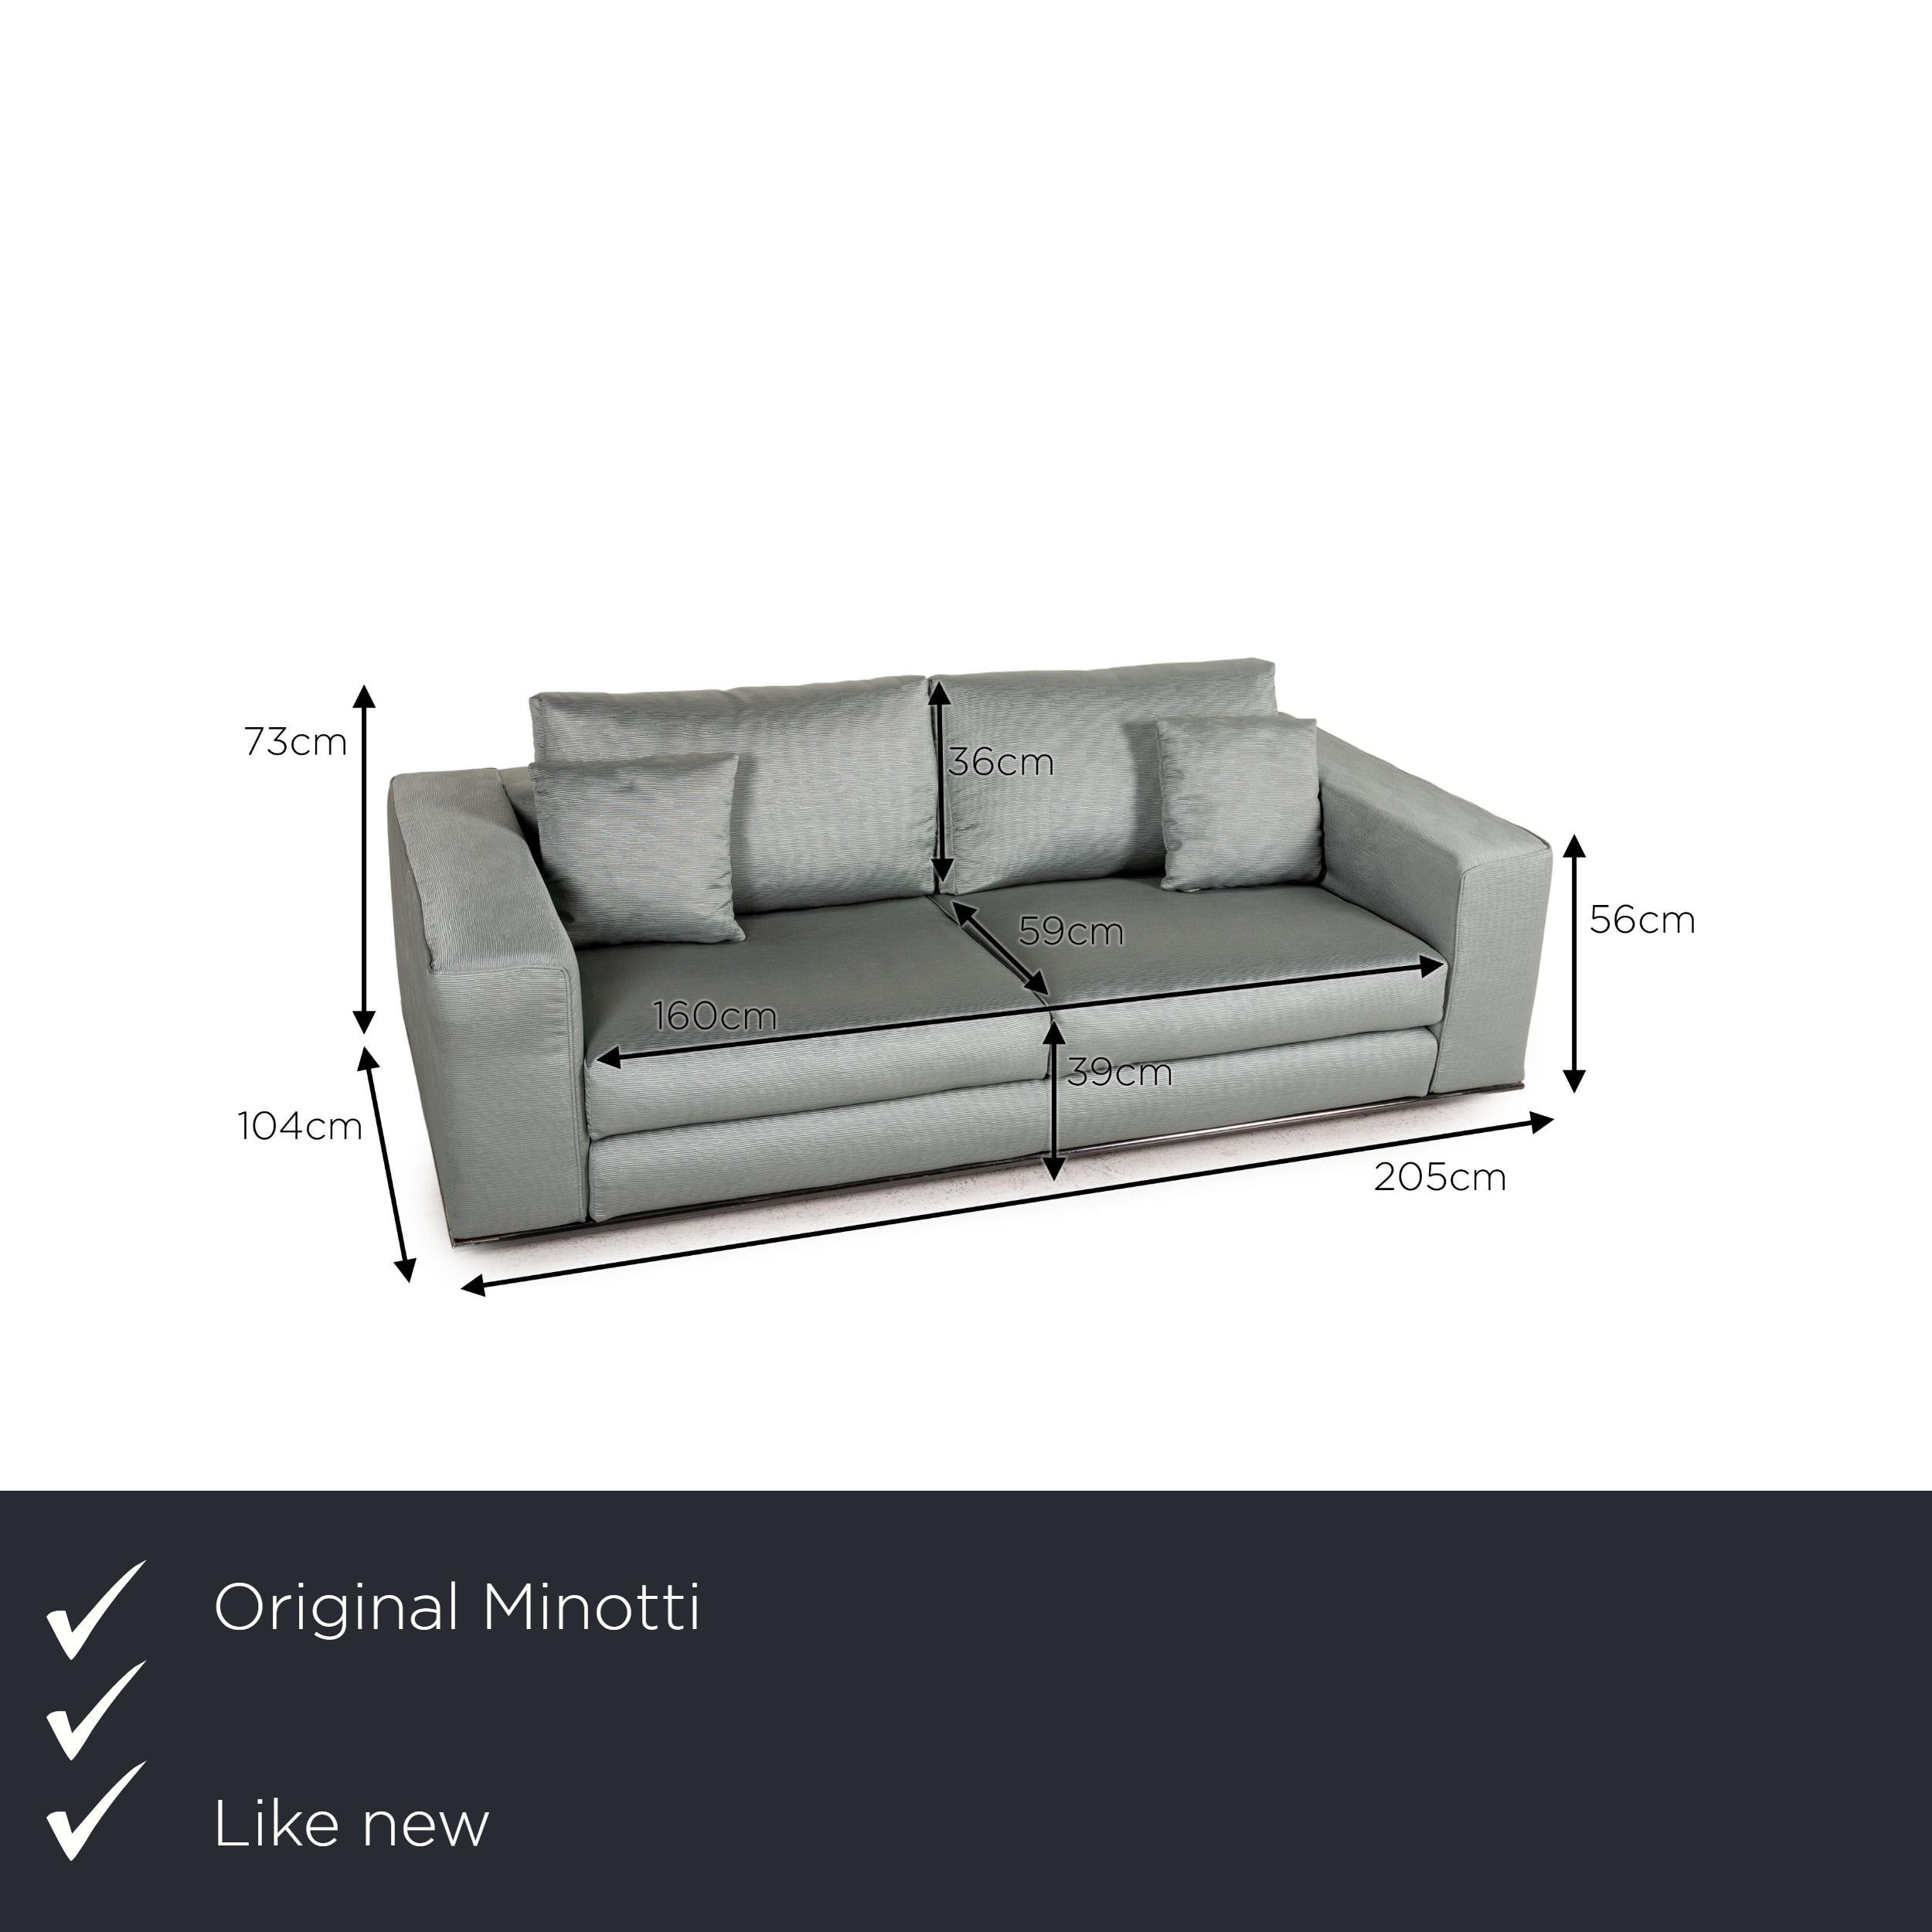 We present to you a Minotti Hamilton Fabric sofa green two seater couch.
 

 Product measurements in centimeters:
 

Depth: 104
Width: 205
Height: 73
Seat height: 39
Rest height: 56
Seat depth: 59
Seat width: 160
Back height: 36.
 